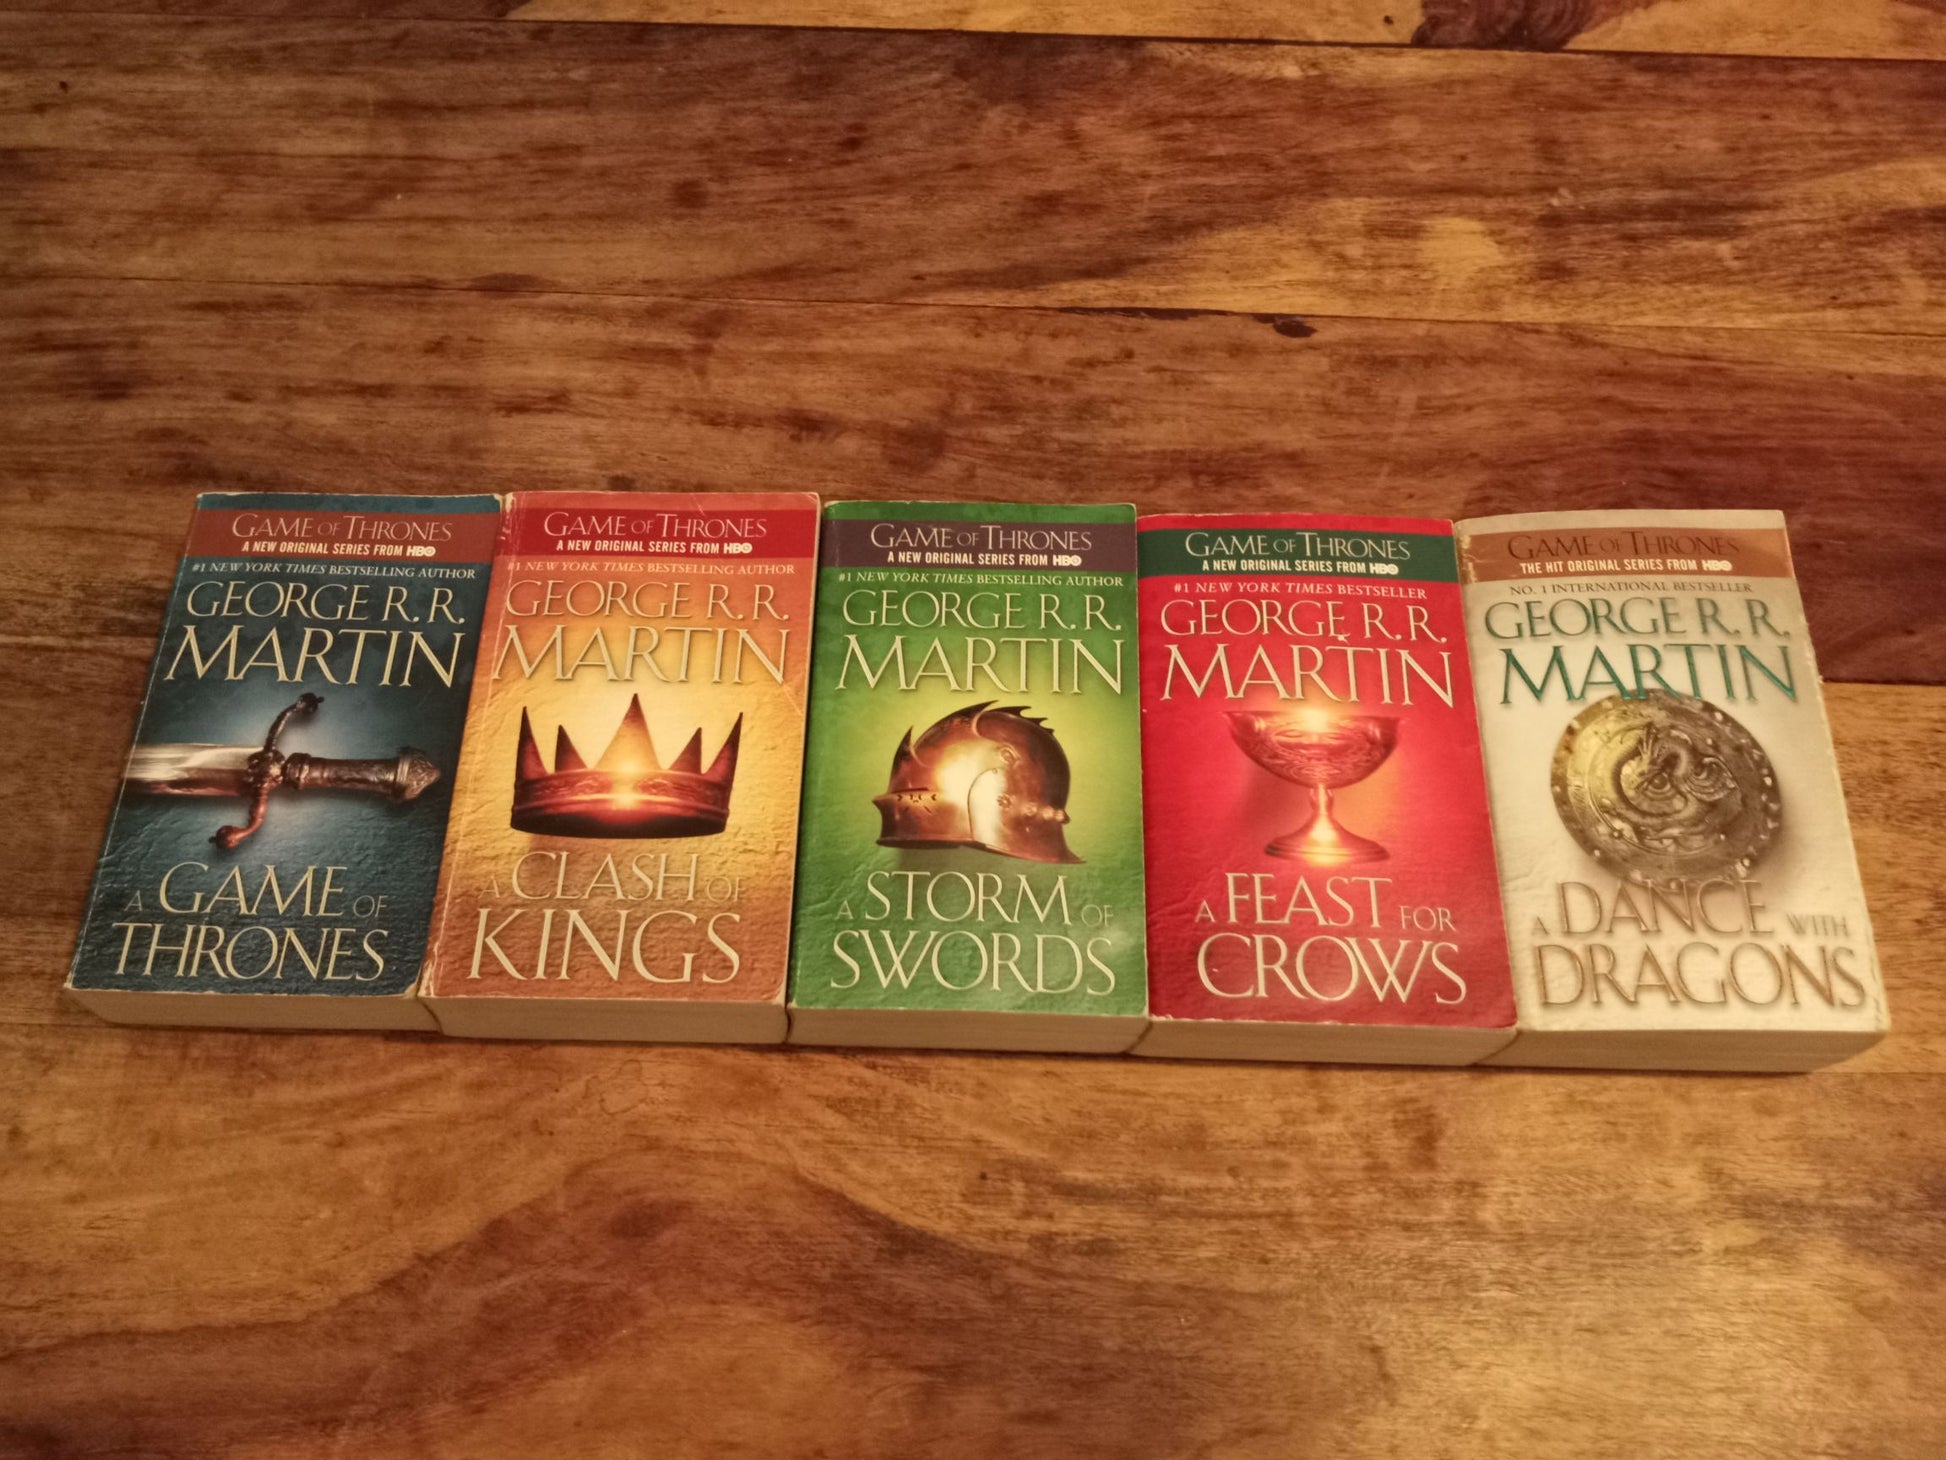 A Game of Thrones (A Song of Ice and Fire, #1) by George R.R. Martin